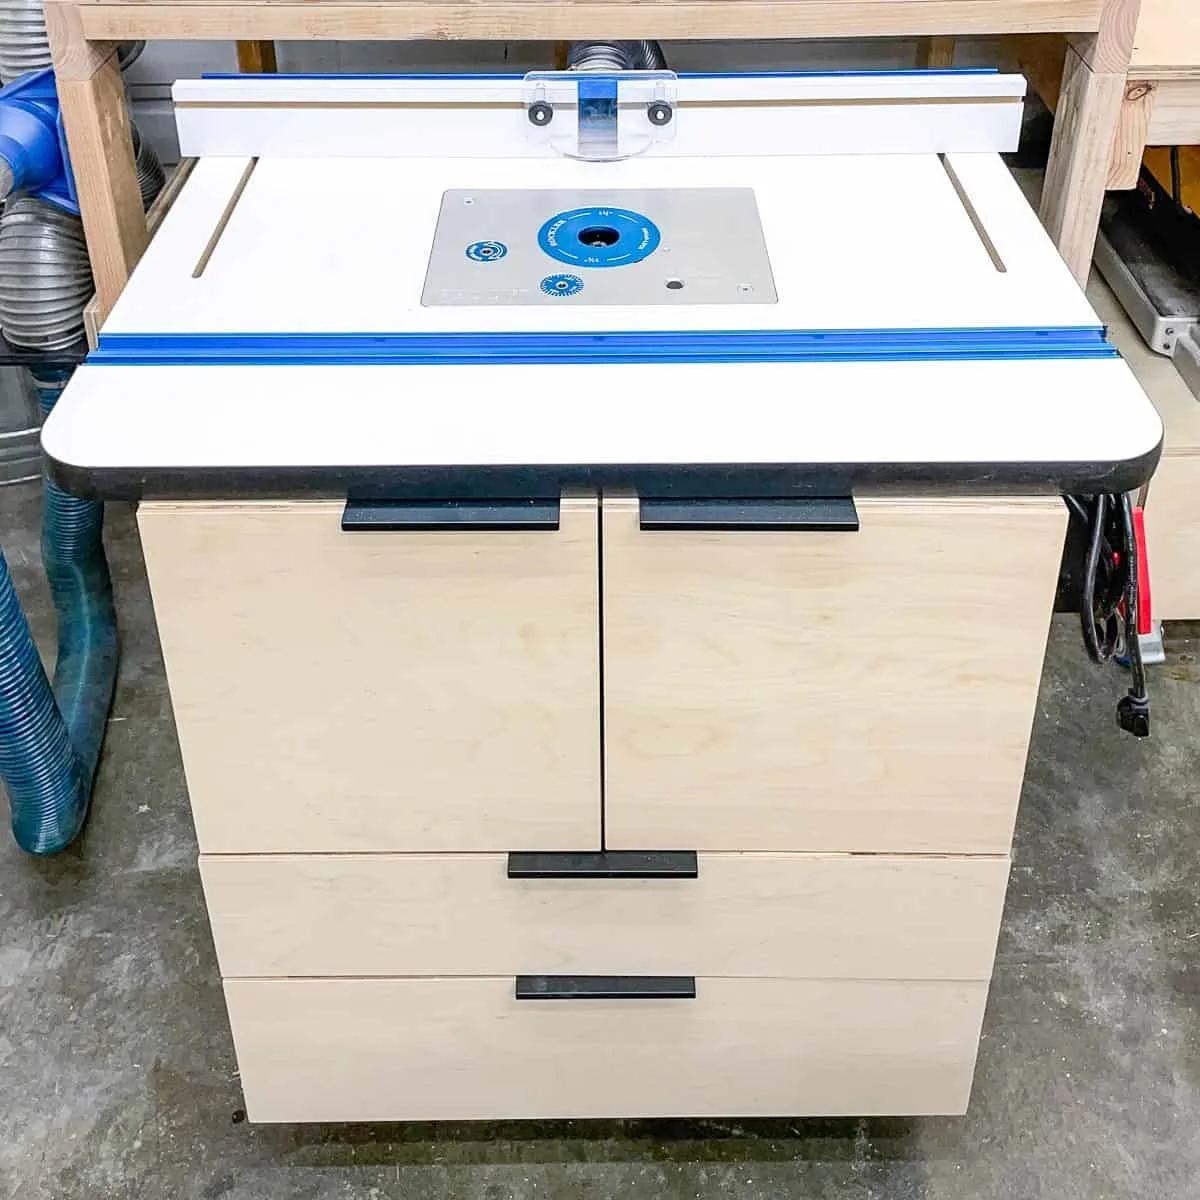 DIY router table with cabinet doors and drawers